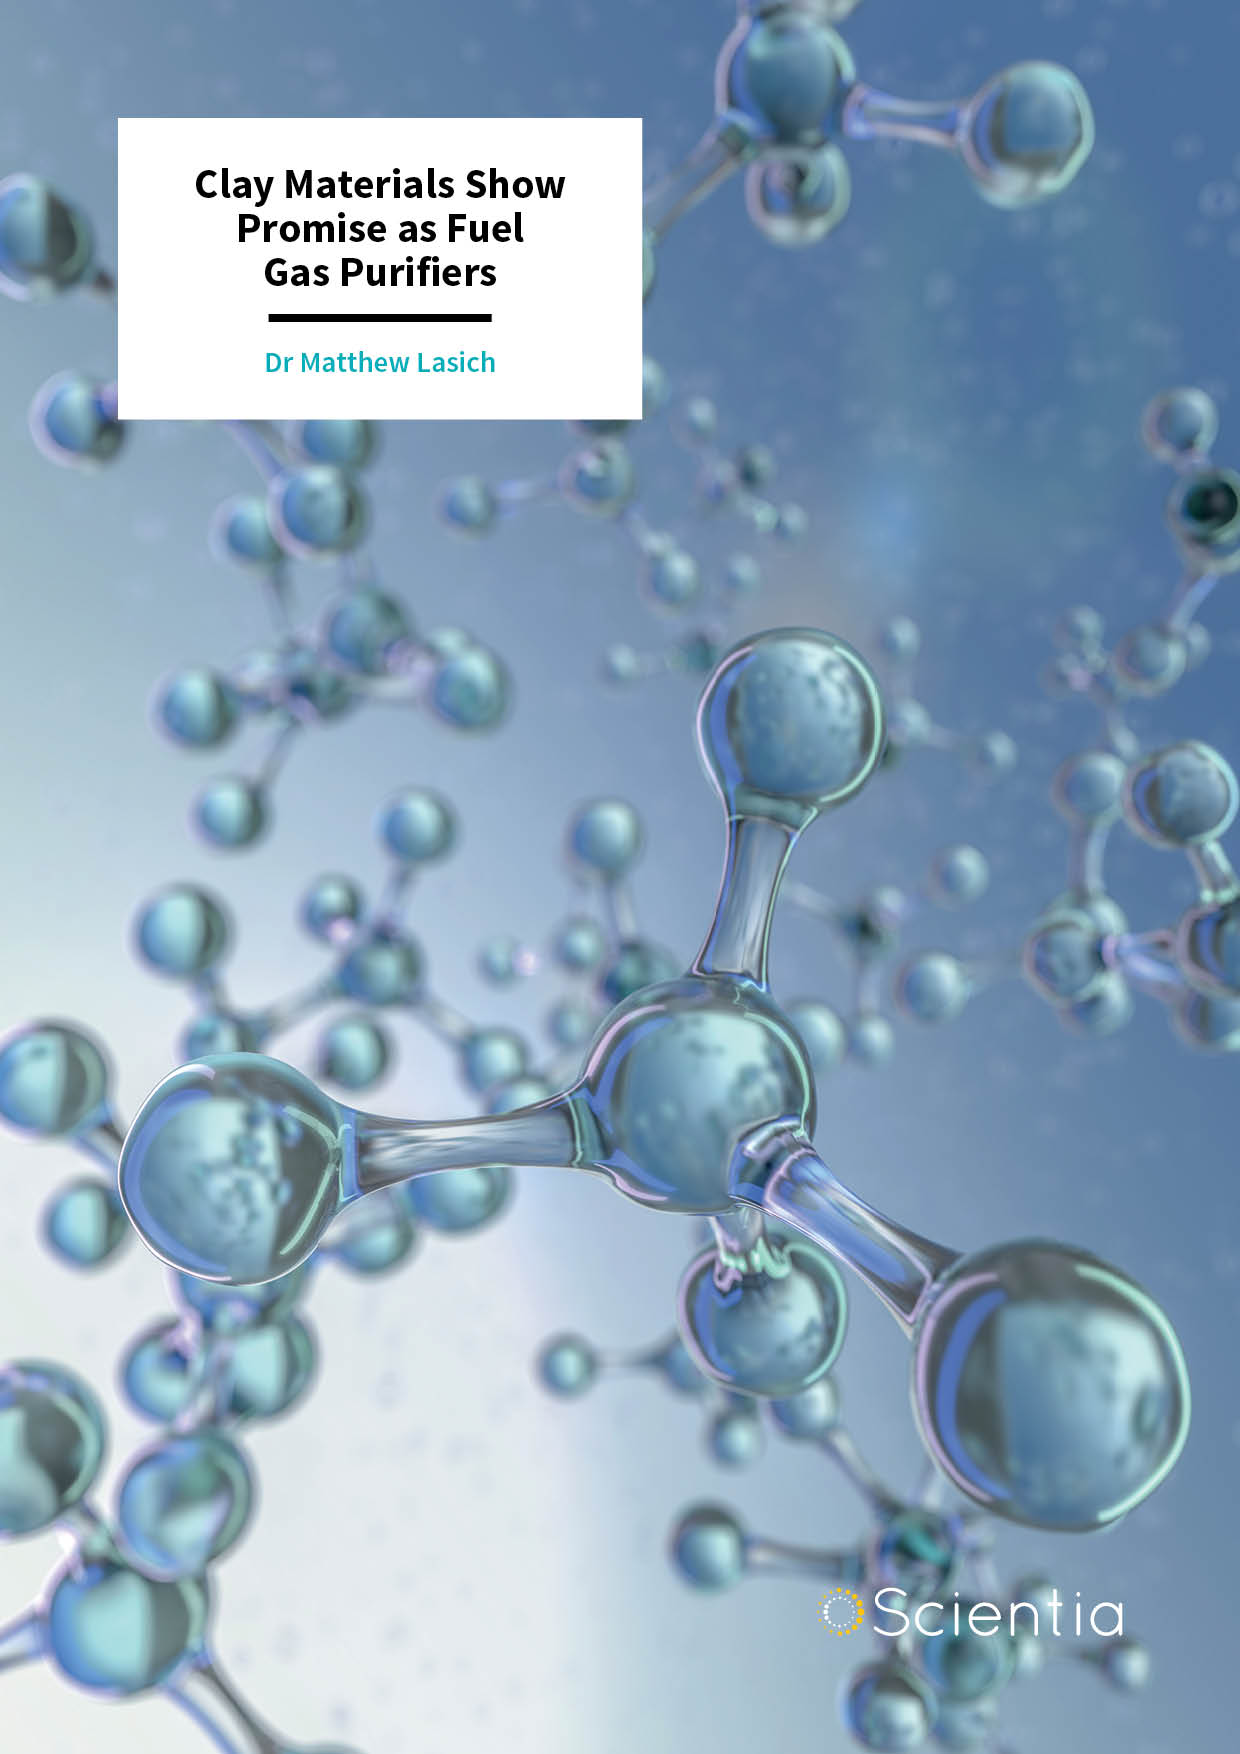 Dr Matthew Lasich – Clay Materials Show Promise as Fuel Gas Purifiers